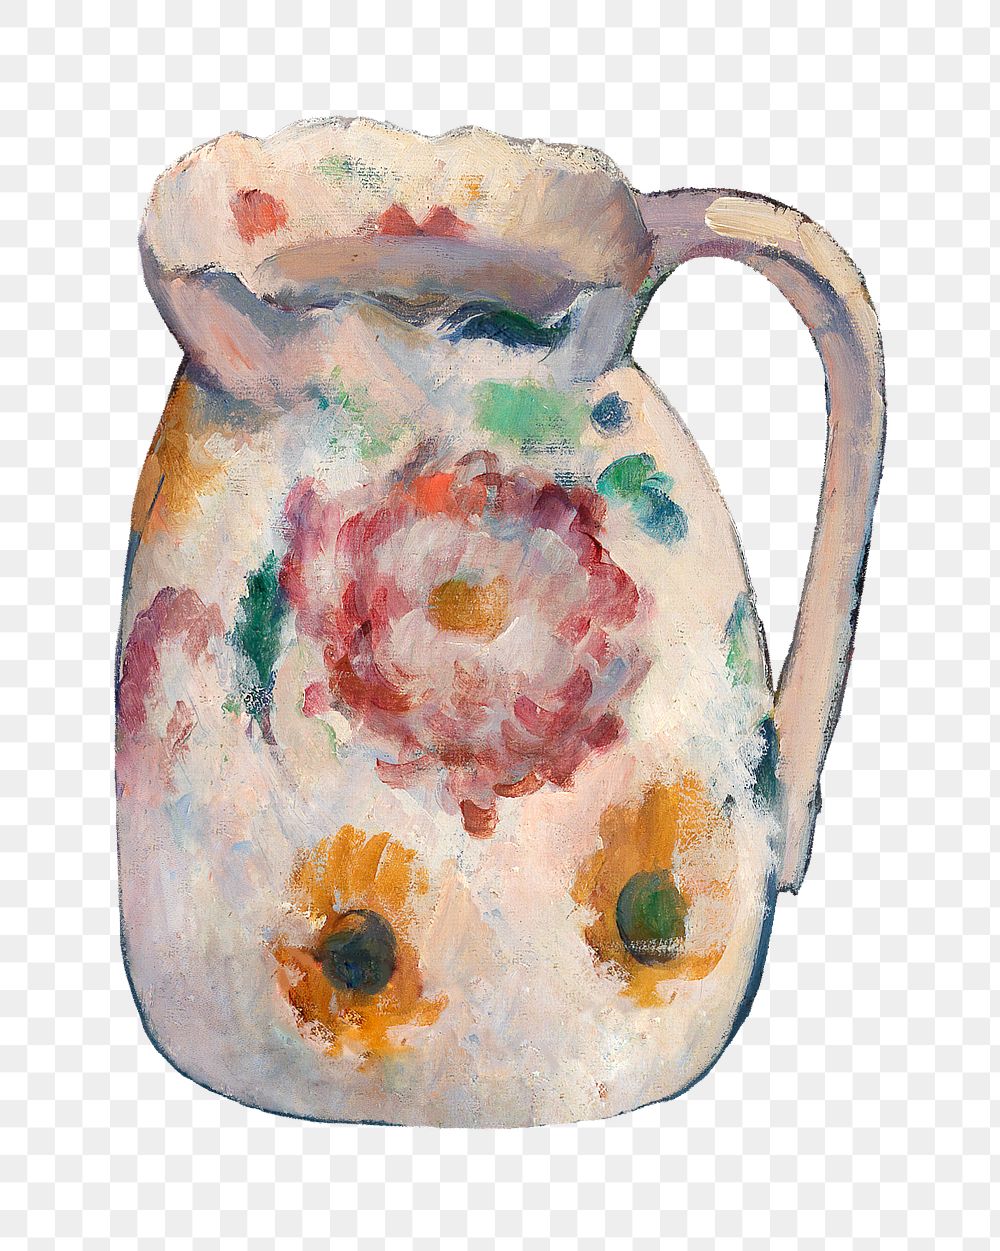  Png Cezanne&rsquo;s jug sticker, still life painting, transparent background.  Remixed by rawpixel.